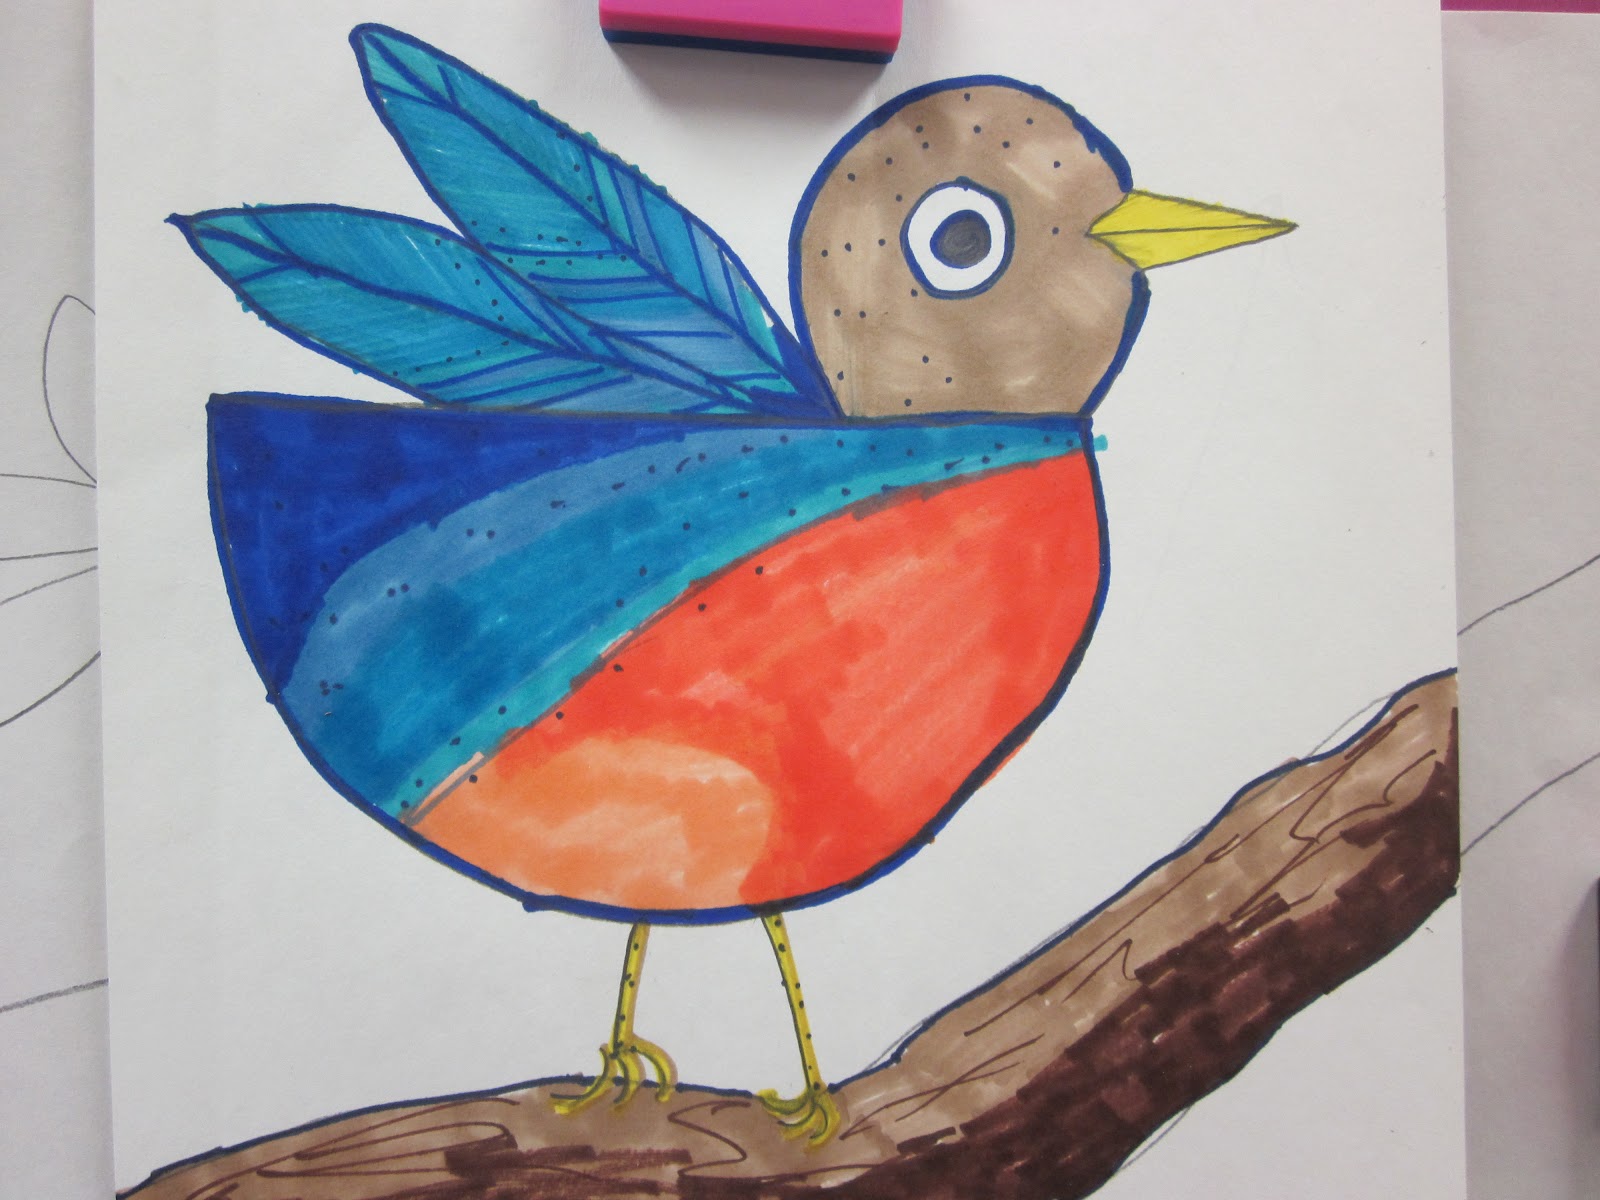 The Lenkerville Art Room: Wednesday works - Drawing with 1st grade